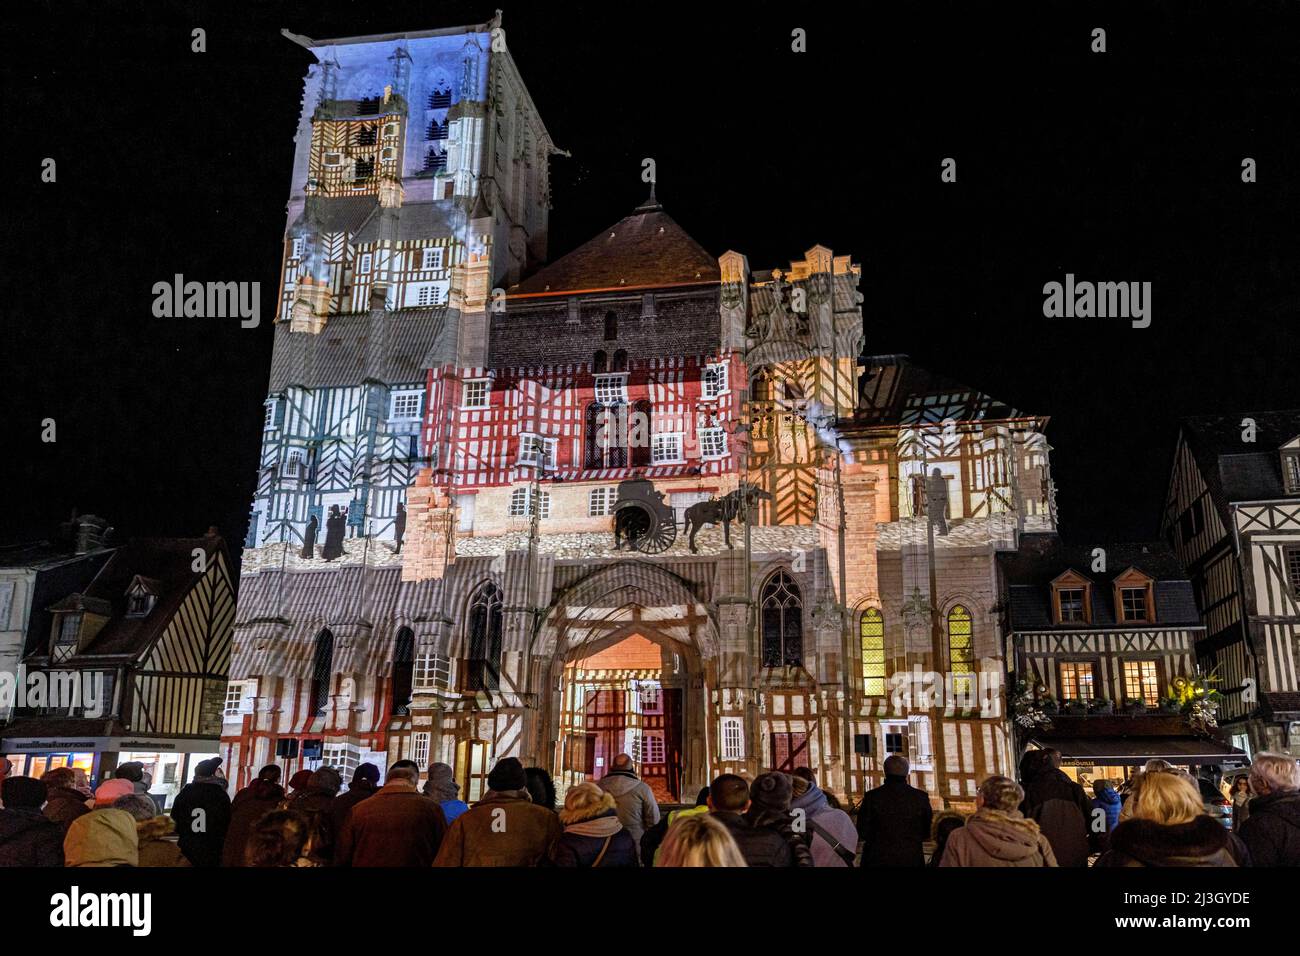 France, Normandy, Eure, Risle Valley, Pont-Audemer, labeled the Most Beautiful Detours of France, nicknamed the Little Venice of Normandy, projection mapping on Saint-Ouen church (16th century), video mapping show directed by Sylvain Legros with the voice of Bruno Putzulu, telling the town's history in 10 animated frescoes Stock Photo